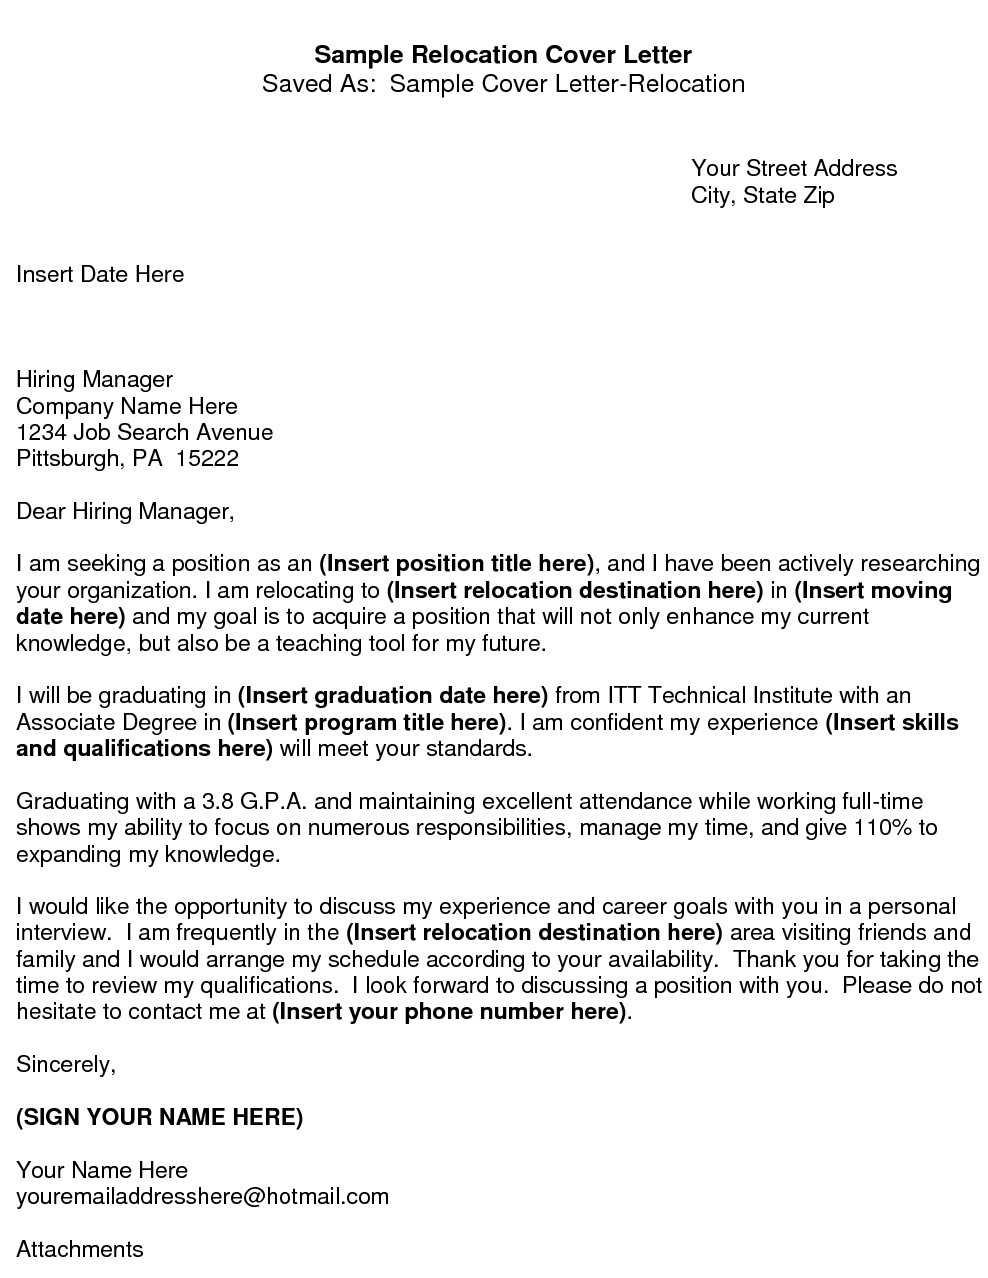 Relocation Cover Letters Template Relocation Cover Letter Tips From Cover Letter